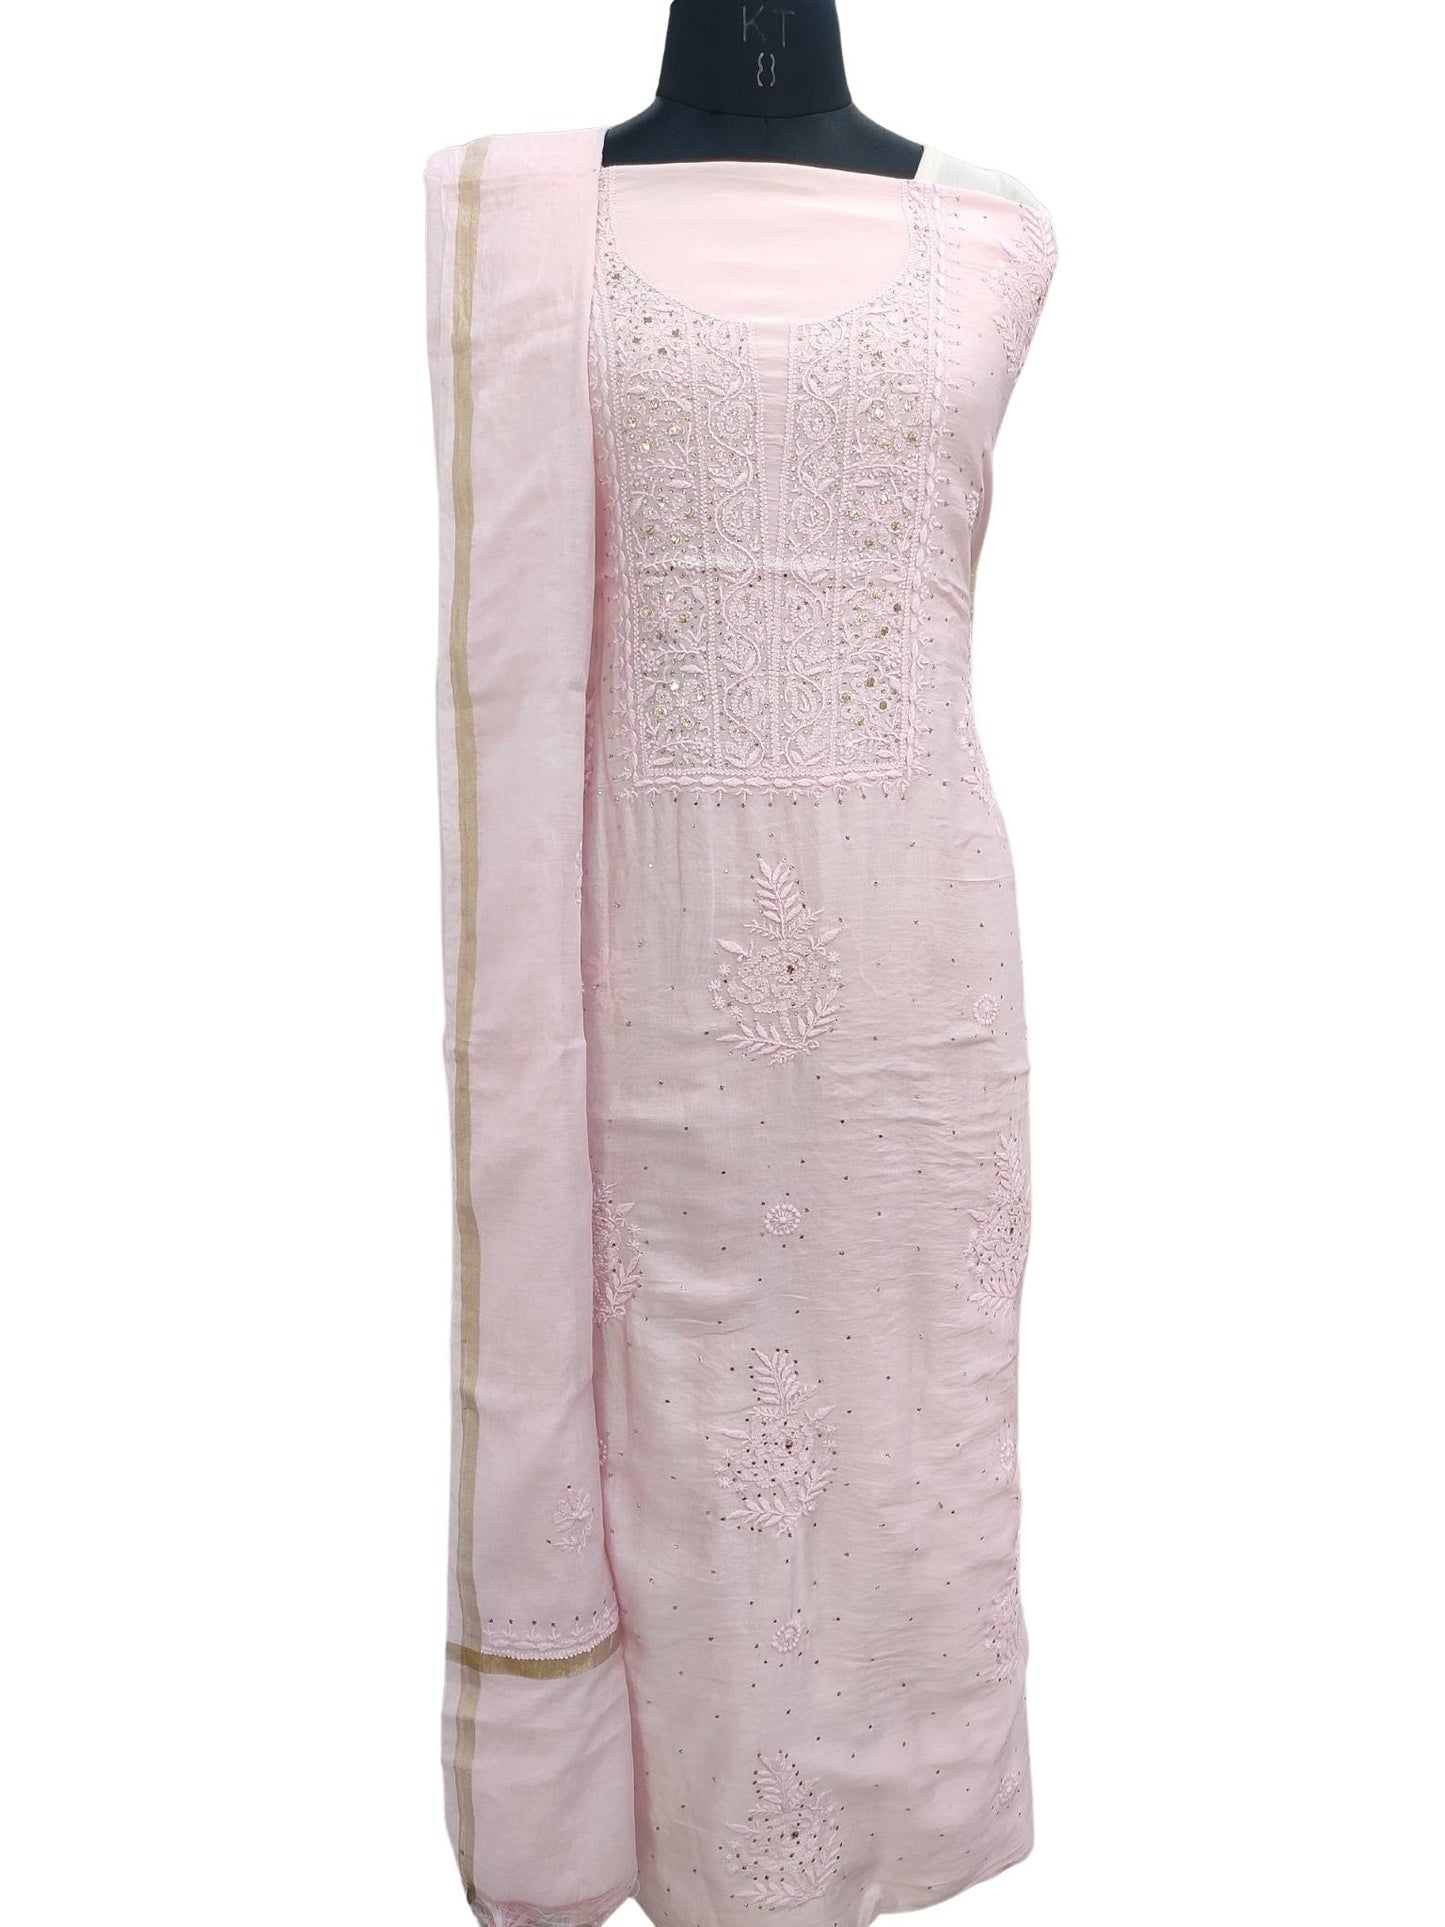 Shyamal Chikan Hand Embroidered Pink Chanderi Silk Lucknowi Chikankari Unstitched Suit Piece With Mukaish Work ( Set of 2 ) - S17695